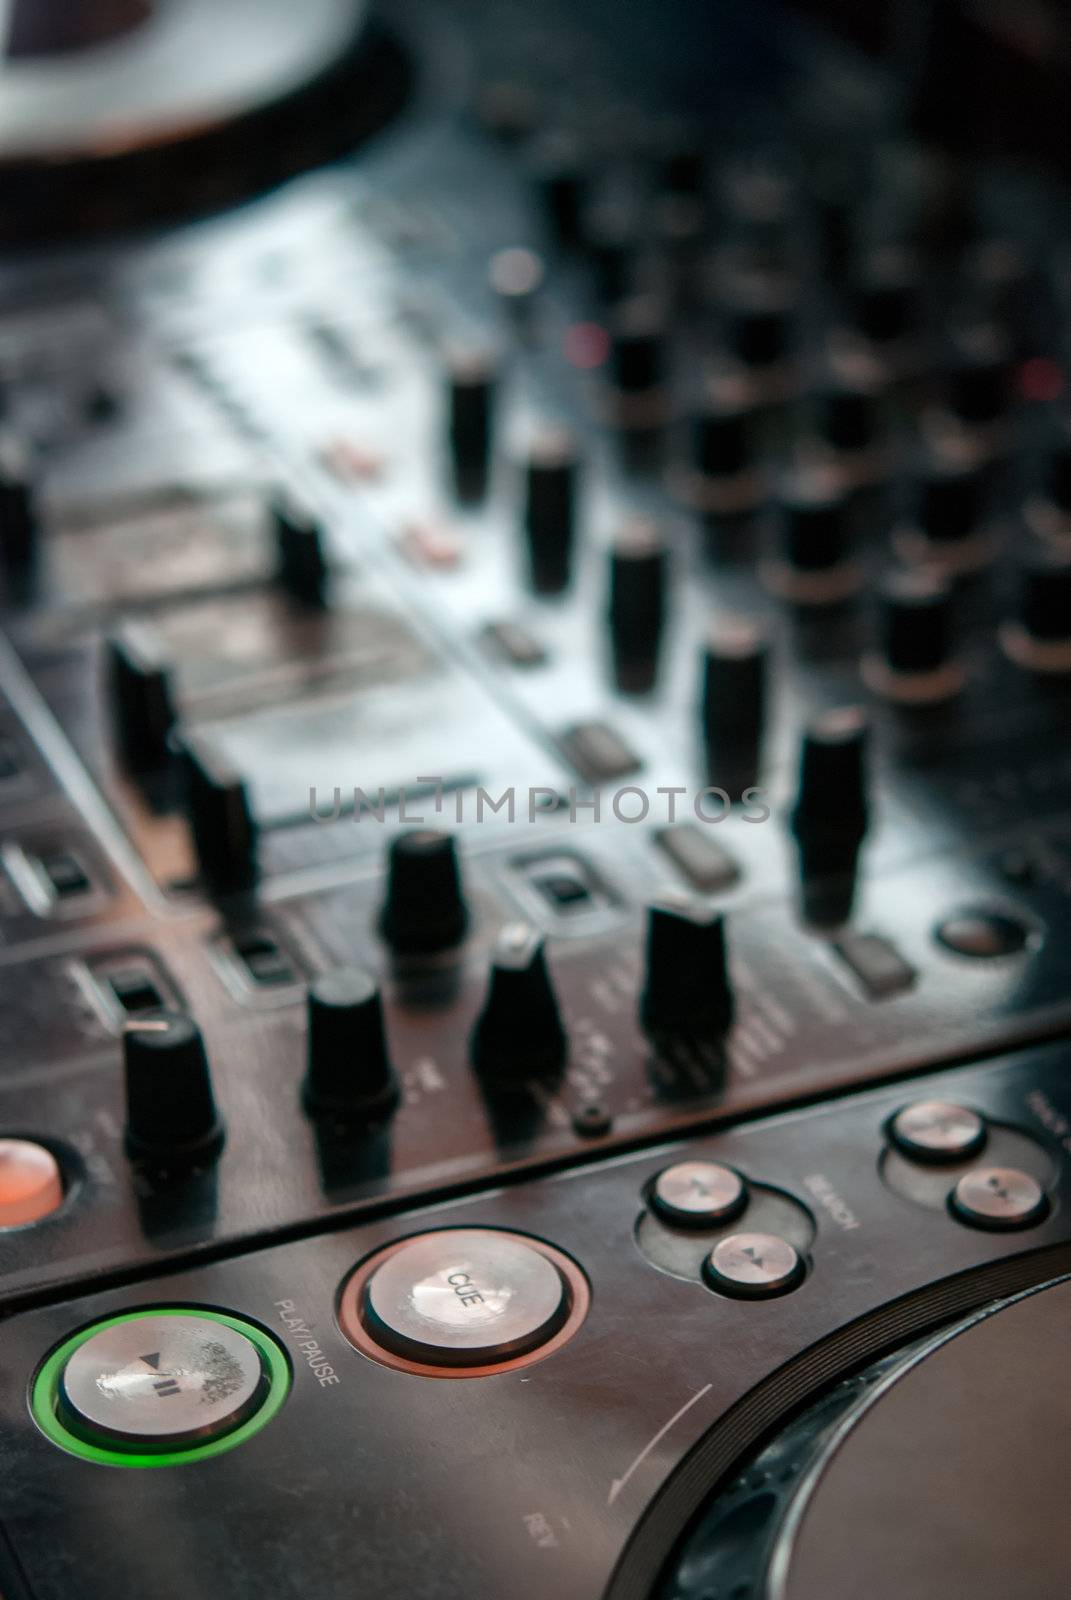 DJ playng on professional mixing controller. Small depth of field